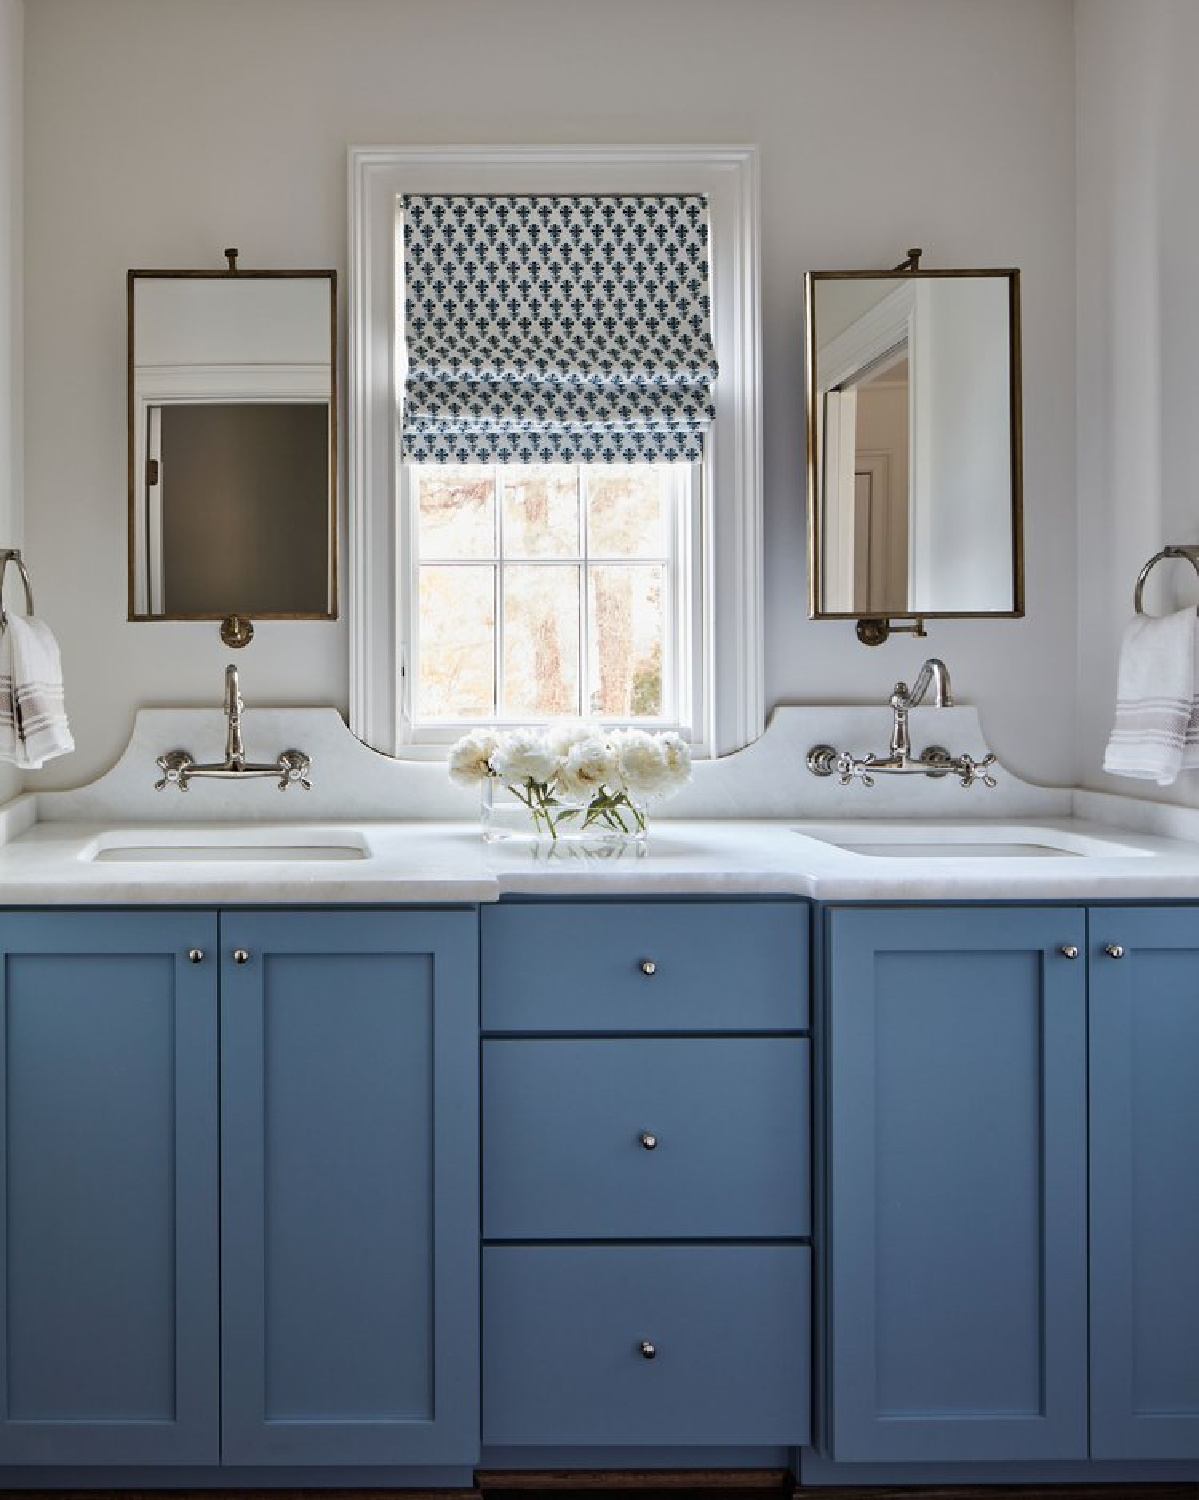 Beautiful blue bath vanity with window in center - @riverbrook_